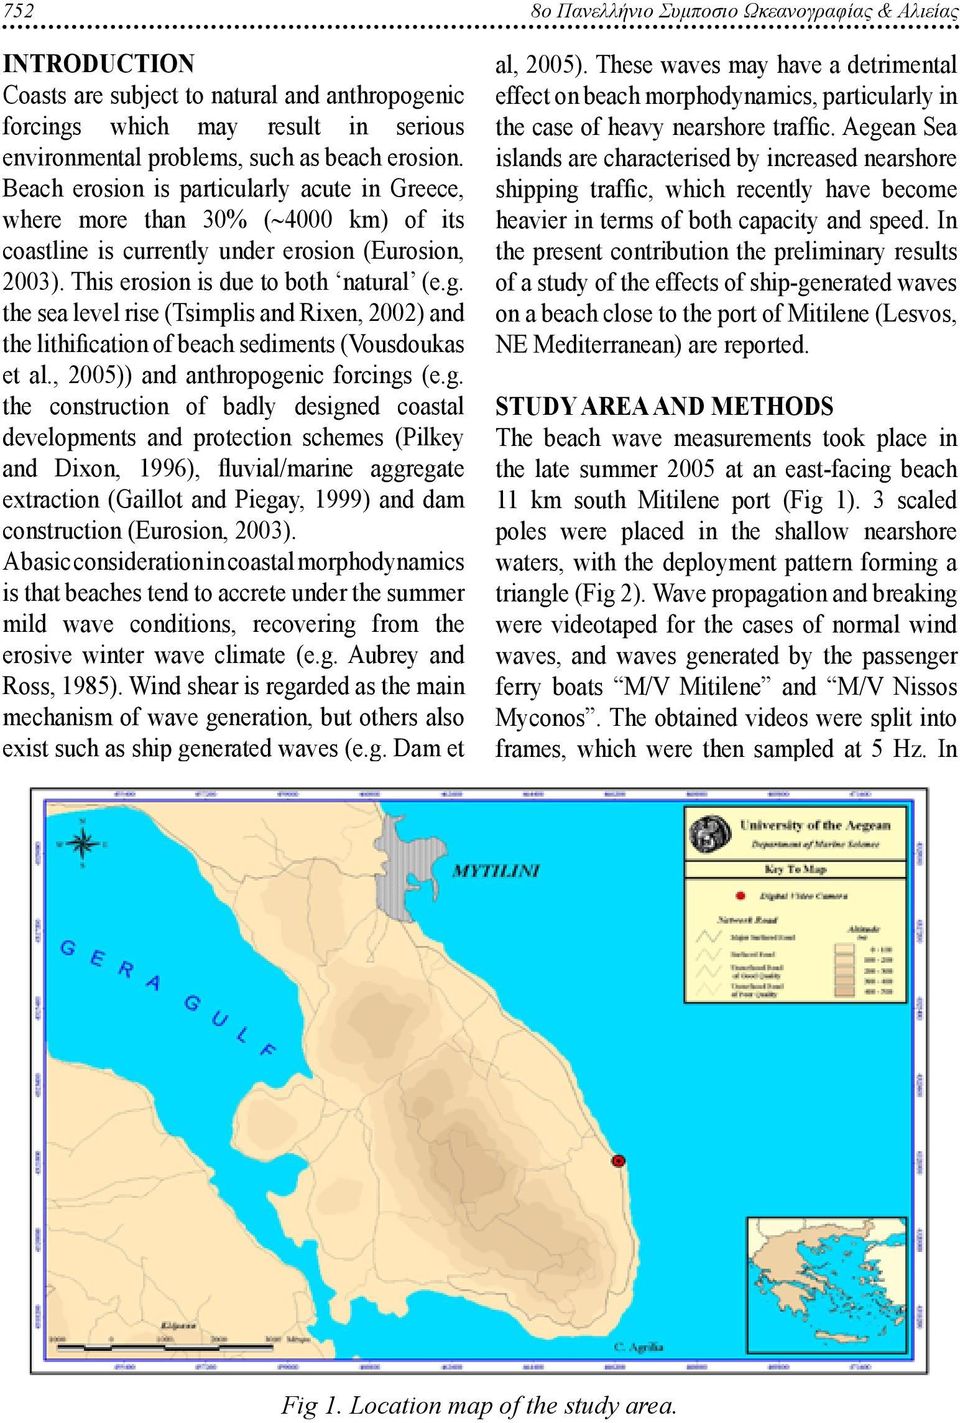 the sea level rise (Tsimplis and Rixen, 2002) and the lithification of beach sediments (Vousdoukas et al., 2005)) and anthropoge